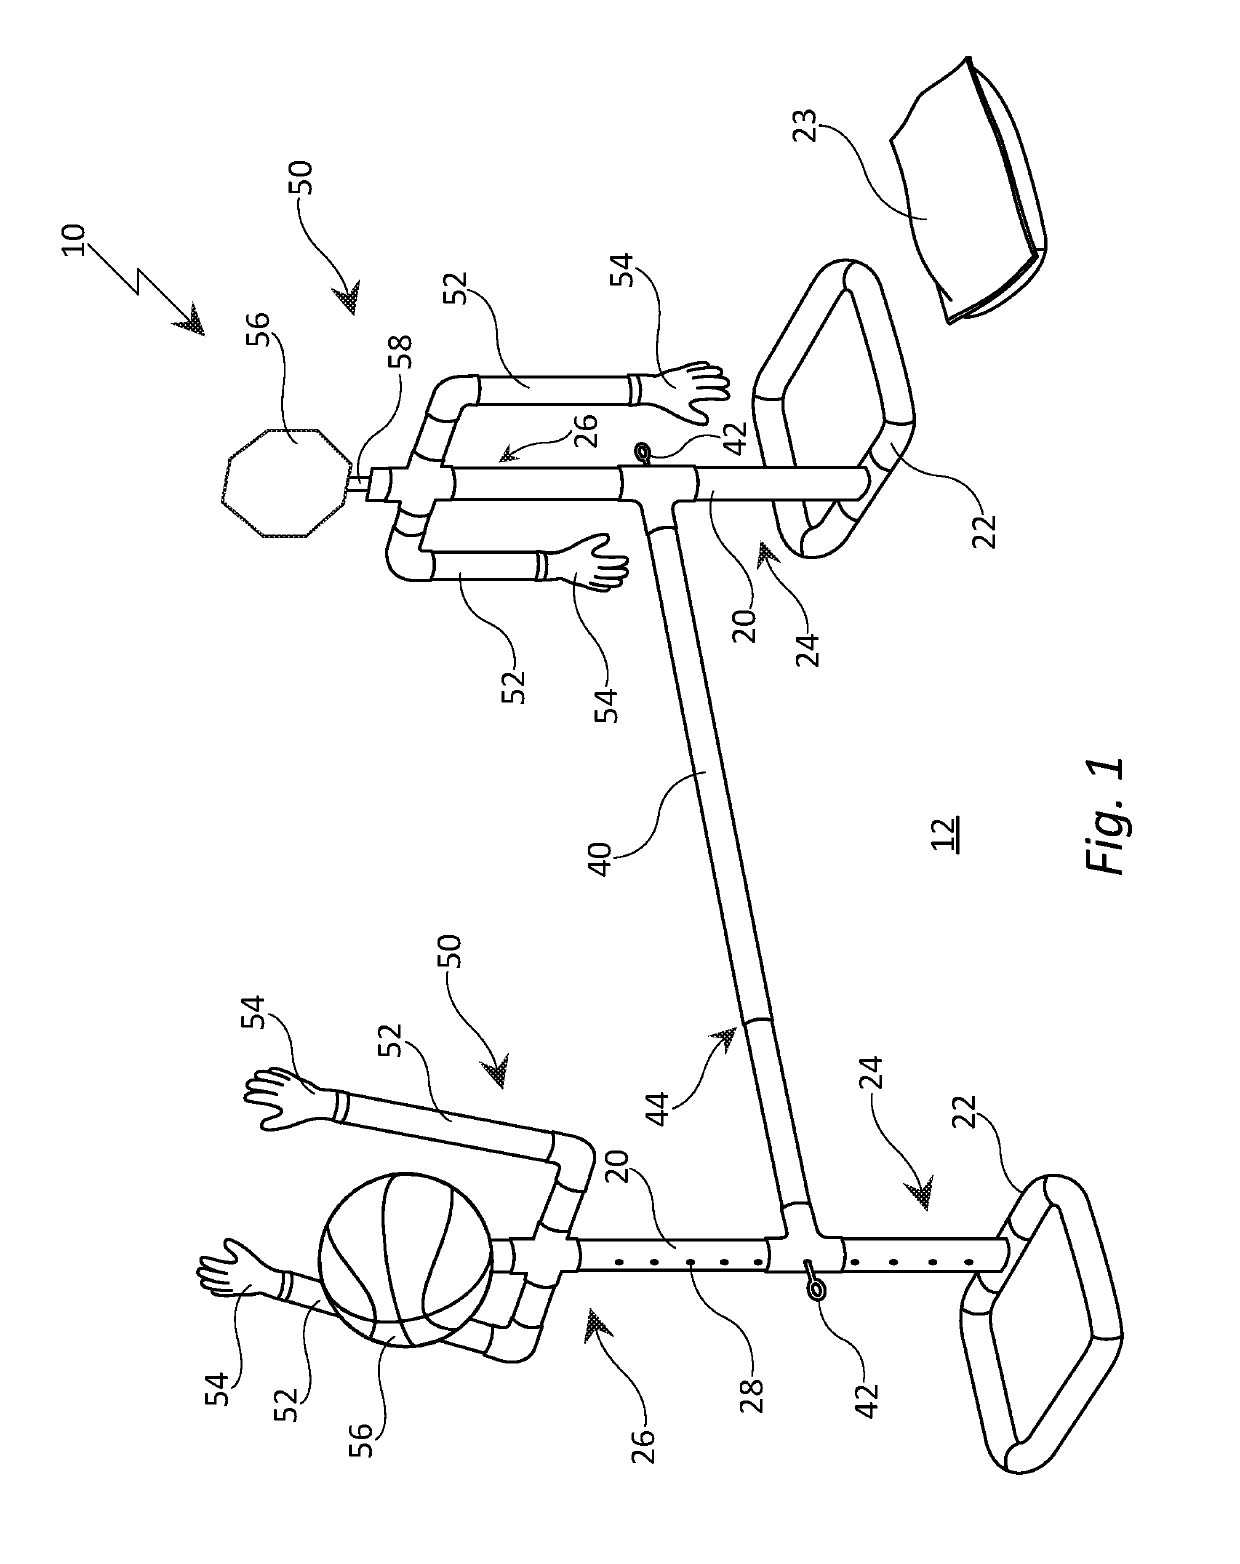 Multi-functional basketball cross-training device, system, and method